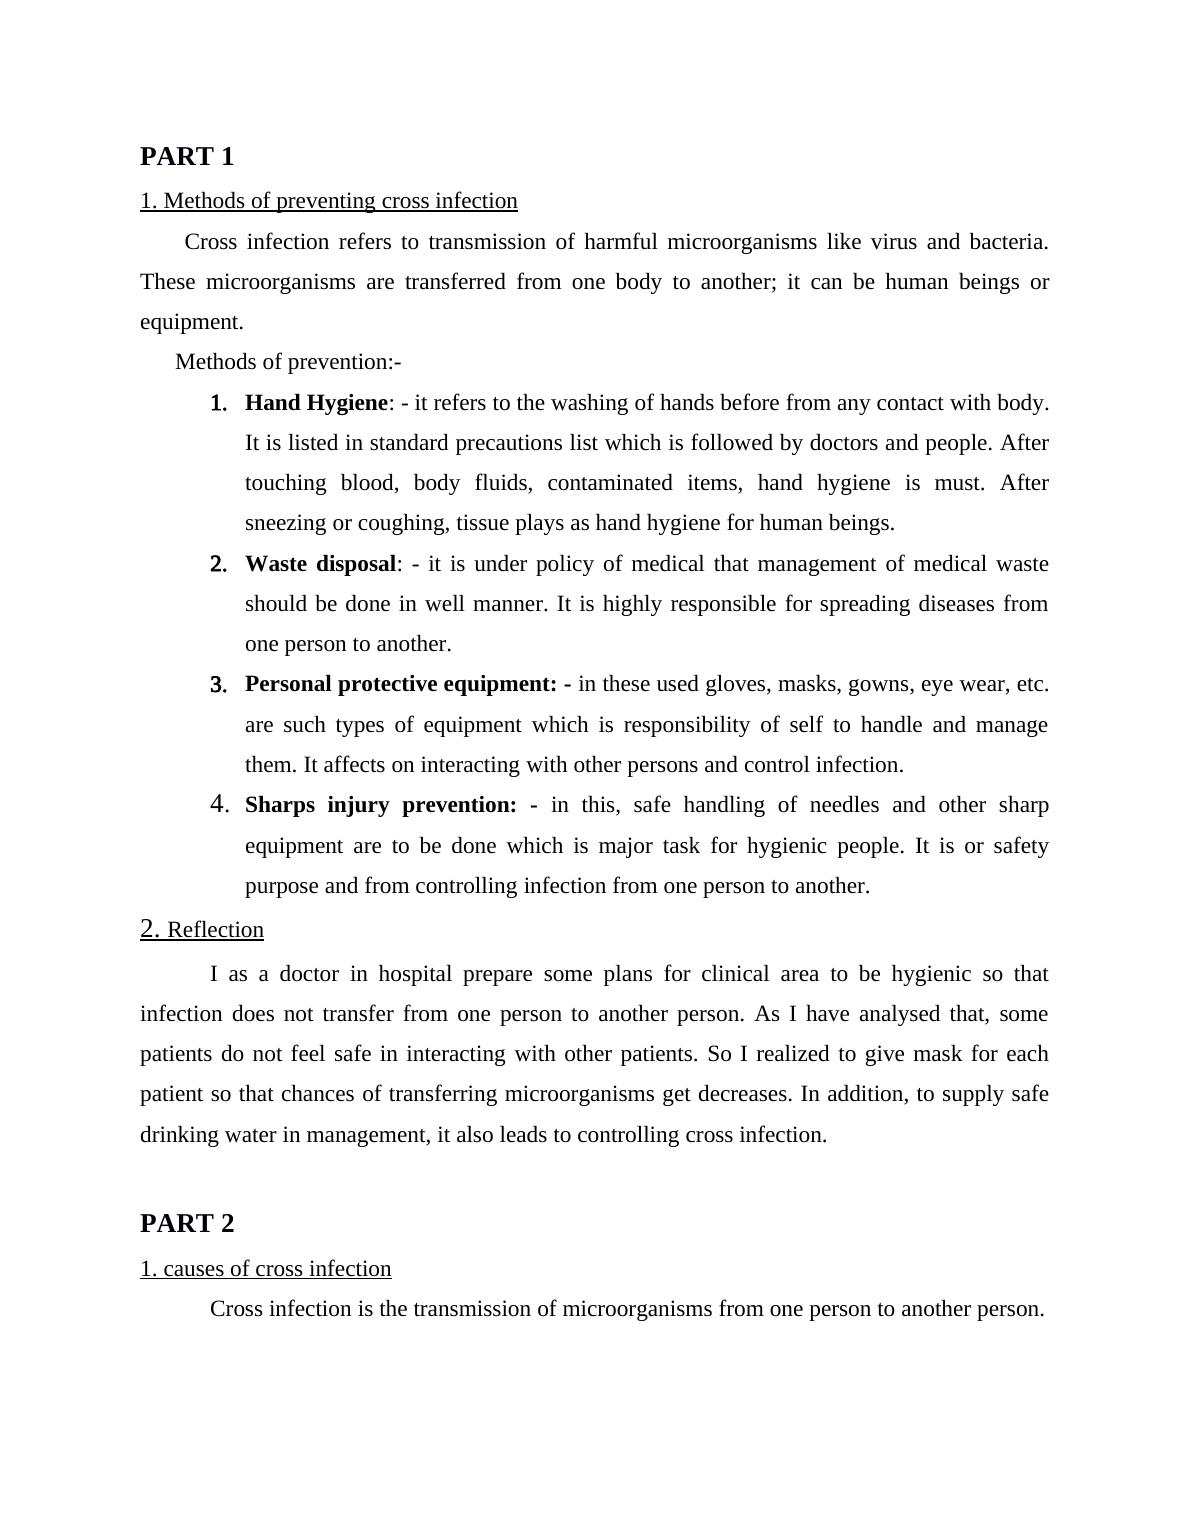 Assignment on Cross Infection pdf_3